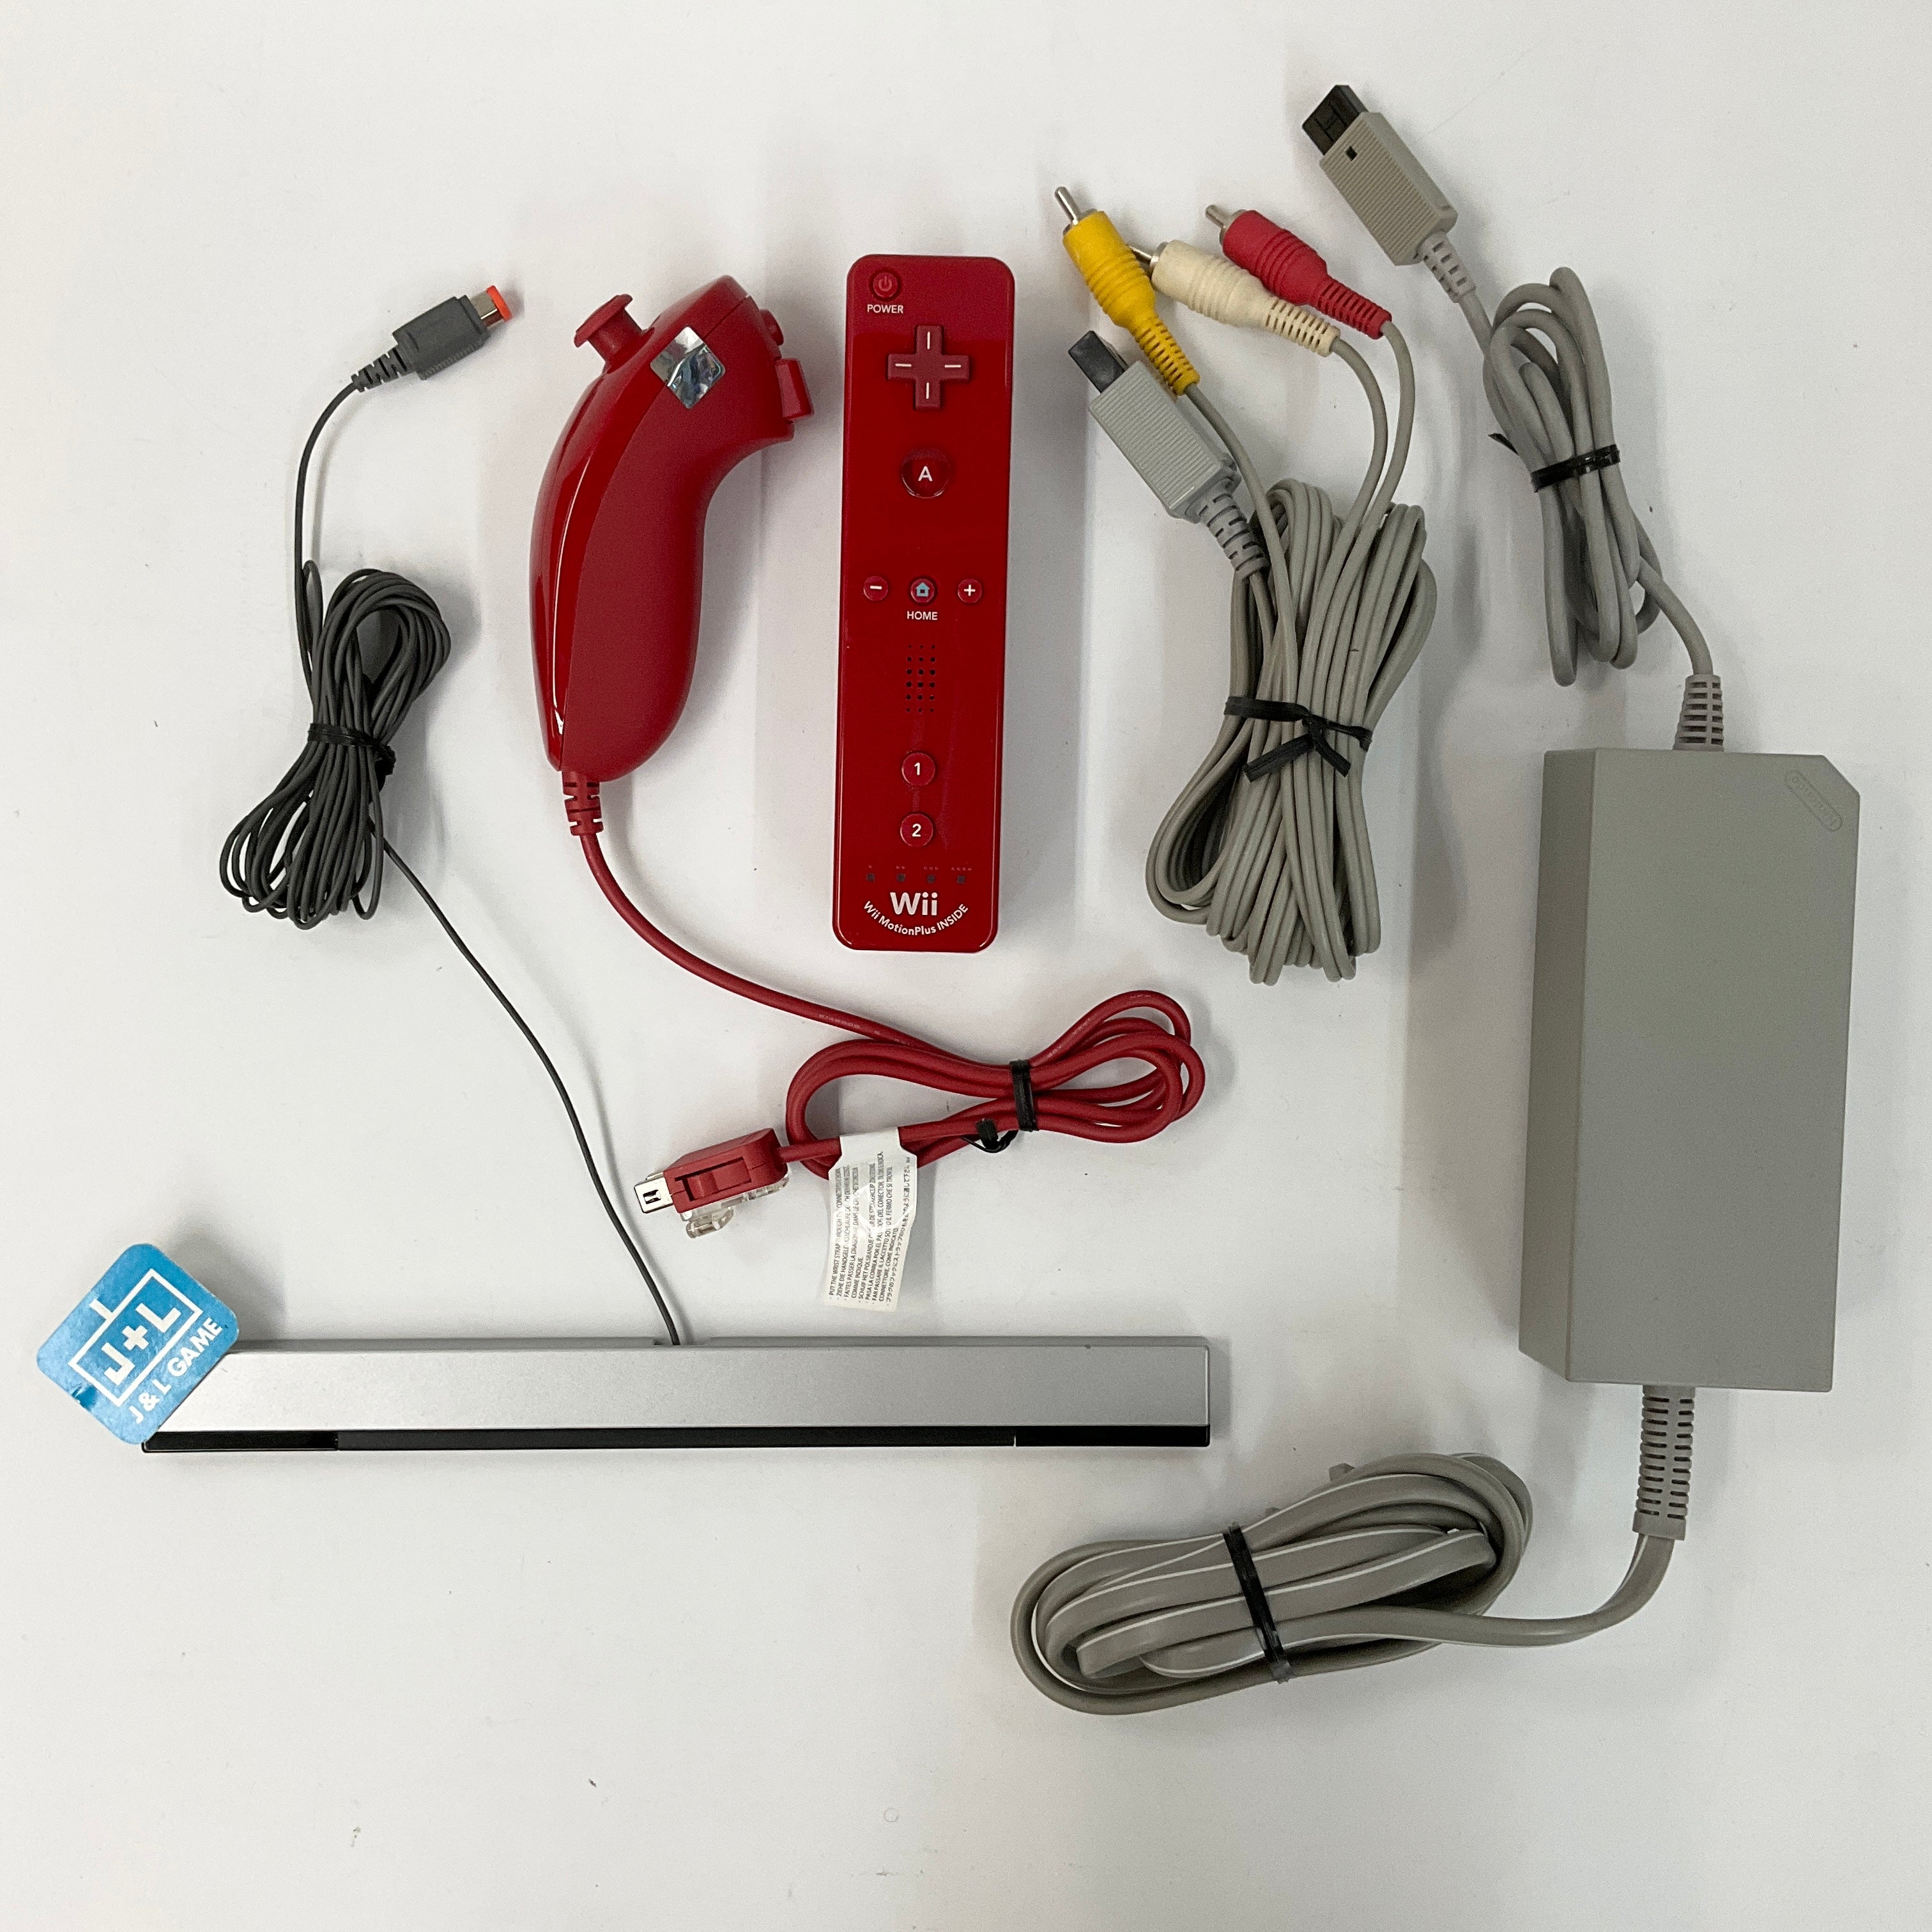 Nintendo Wii Console (Red) - Nintendo Wii [Pre-Owned] Consoles Nintendo   